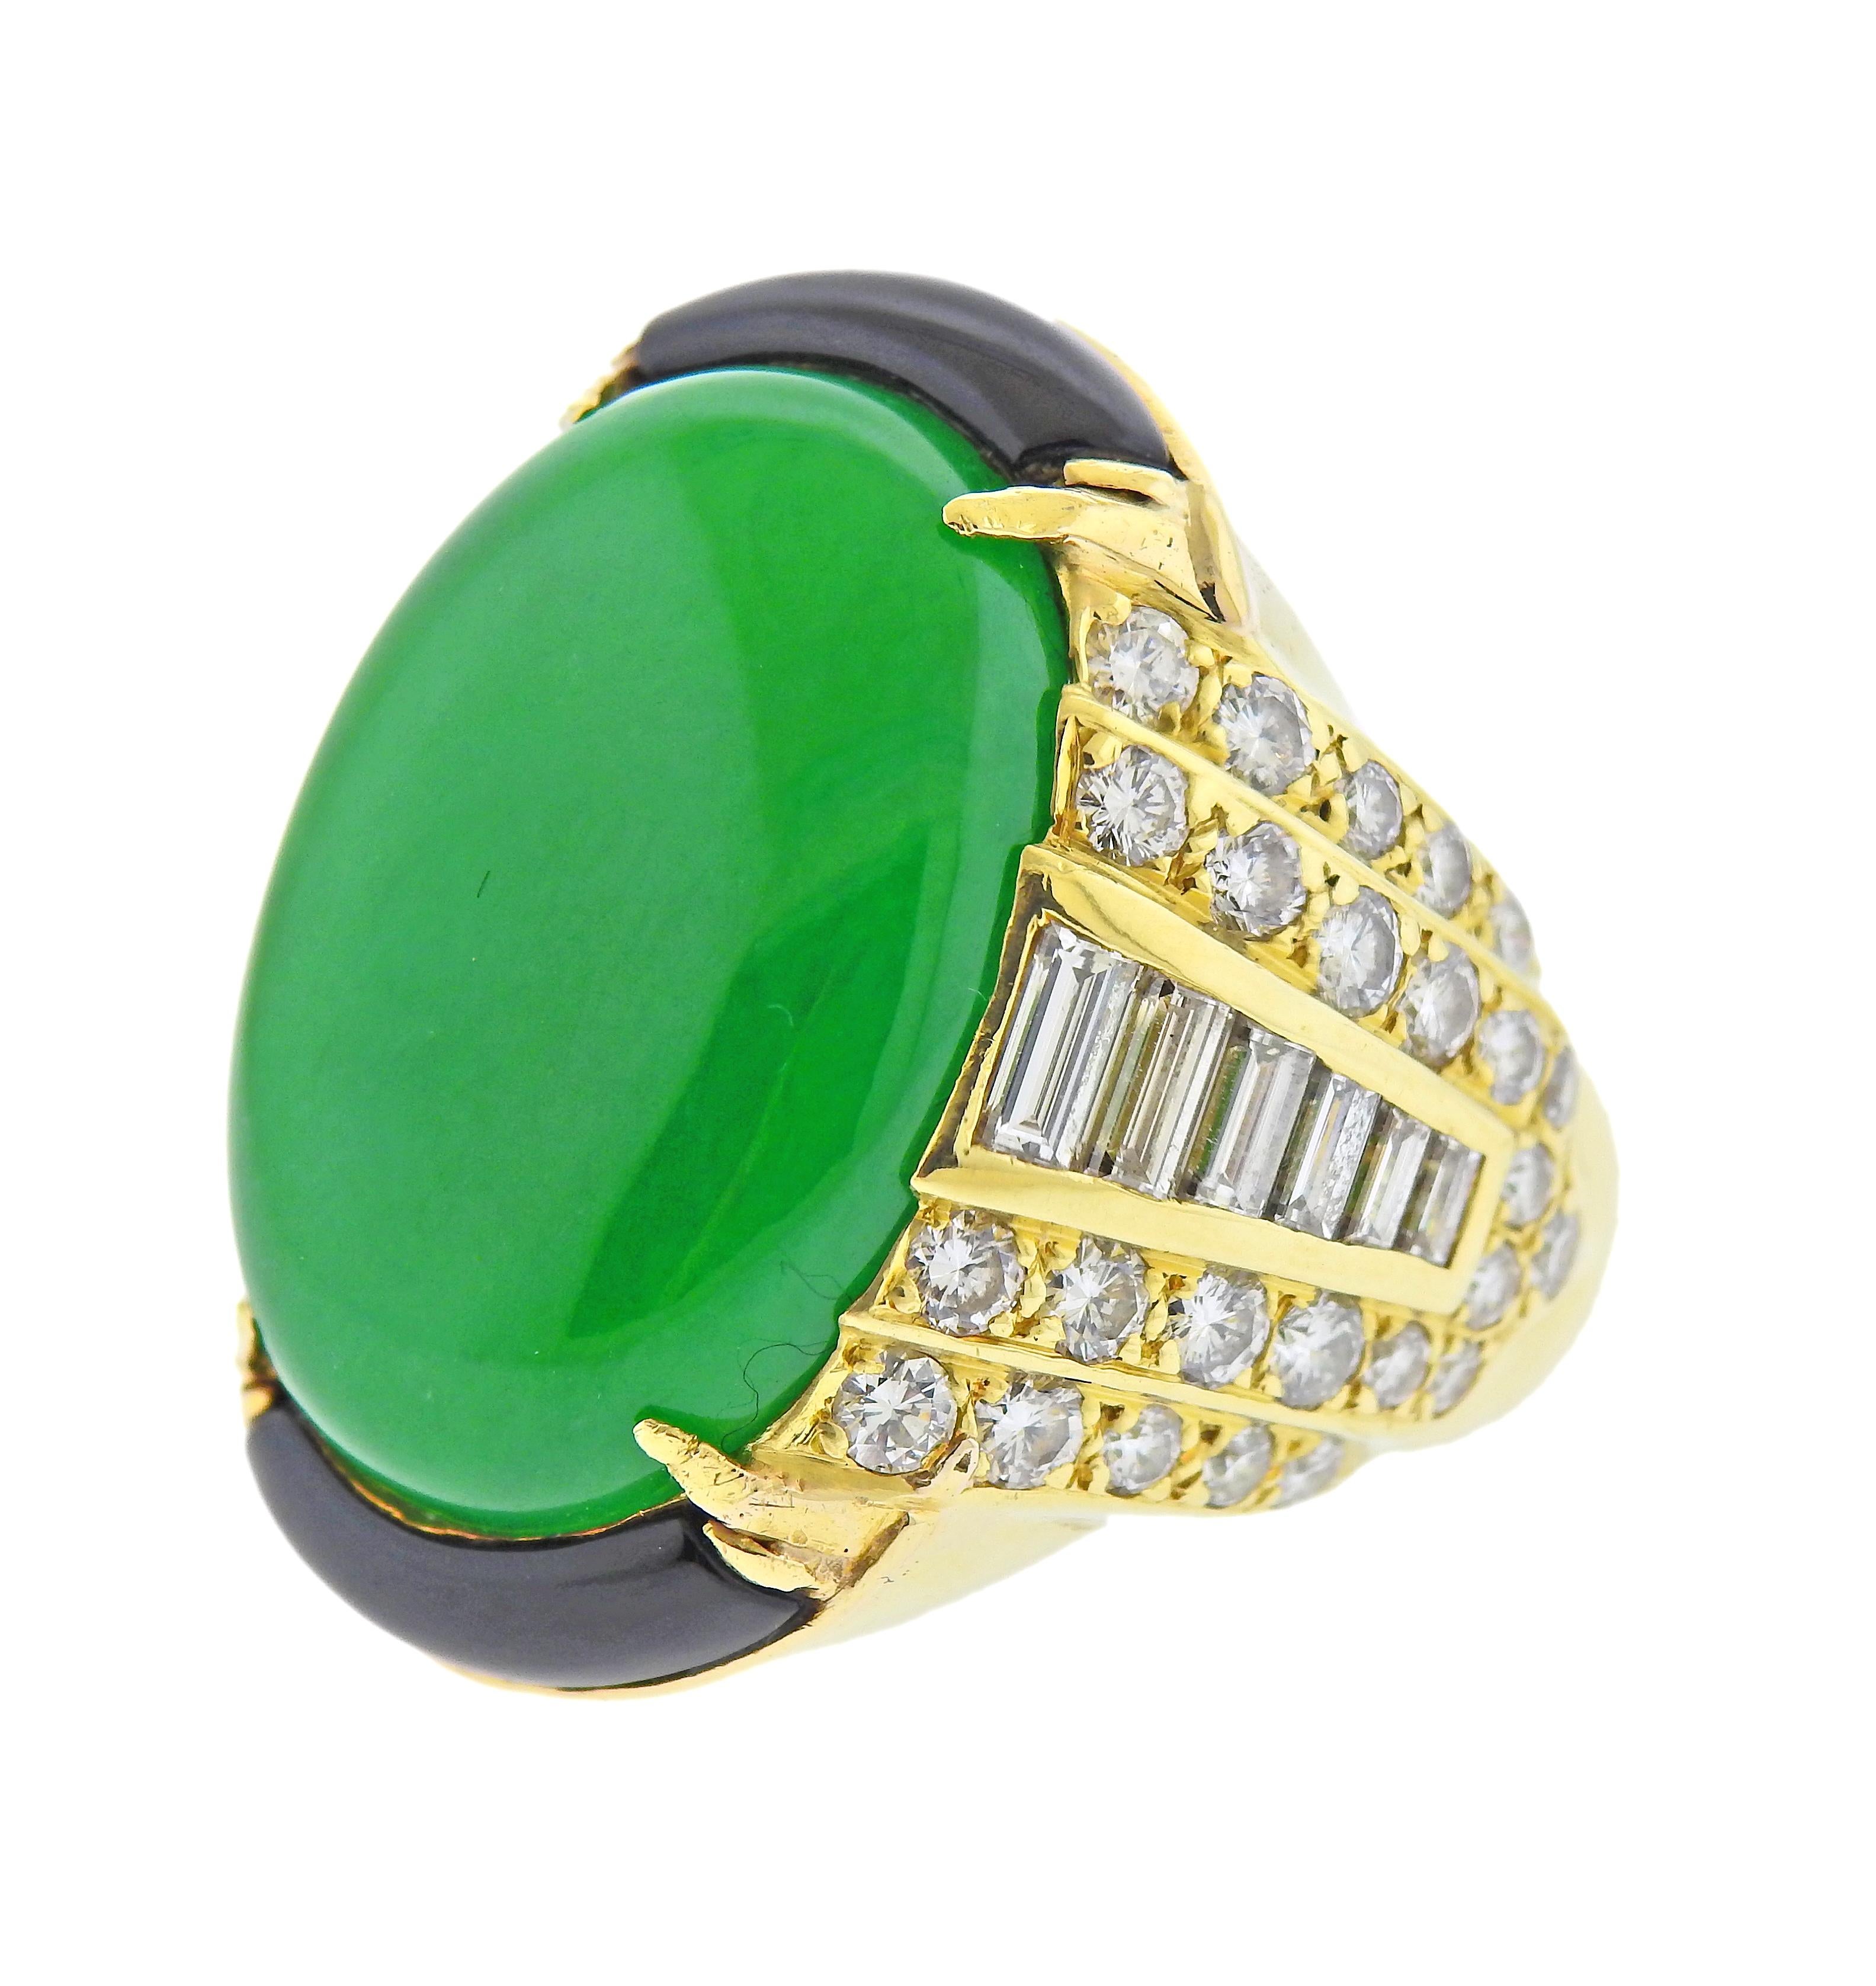 GIA certified natural jadeite jade cabochon, measuring 24.21 x 17.21 x 6.00mm, set in 18k gold ring, surrounded with onyx and approx. 3.00ctw in diamonds. Ring size - 7.5, ring top is 30mm wide. Marked: 18k. Weight - 29.8 grams. 